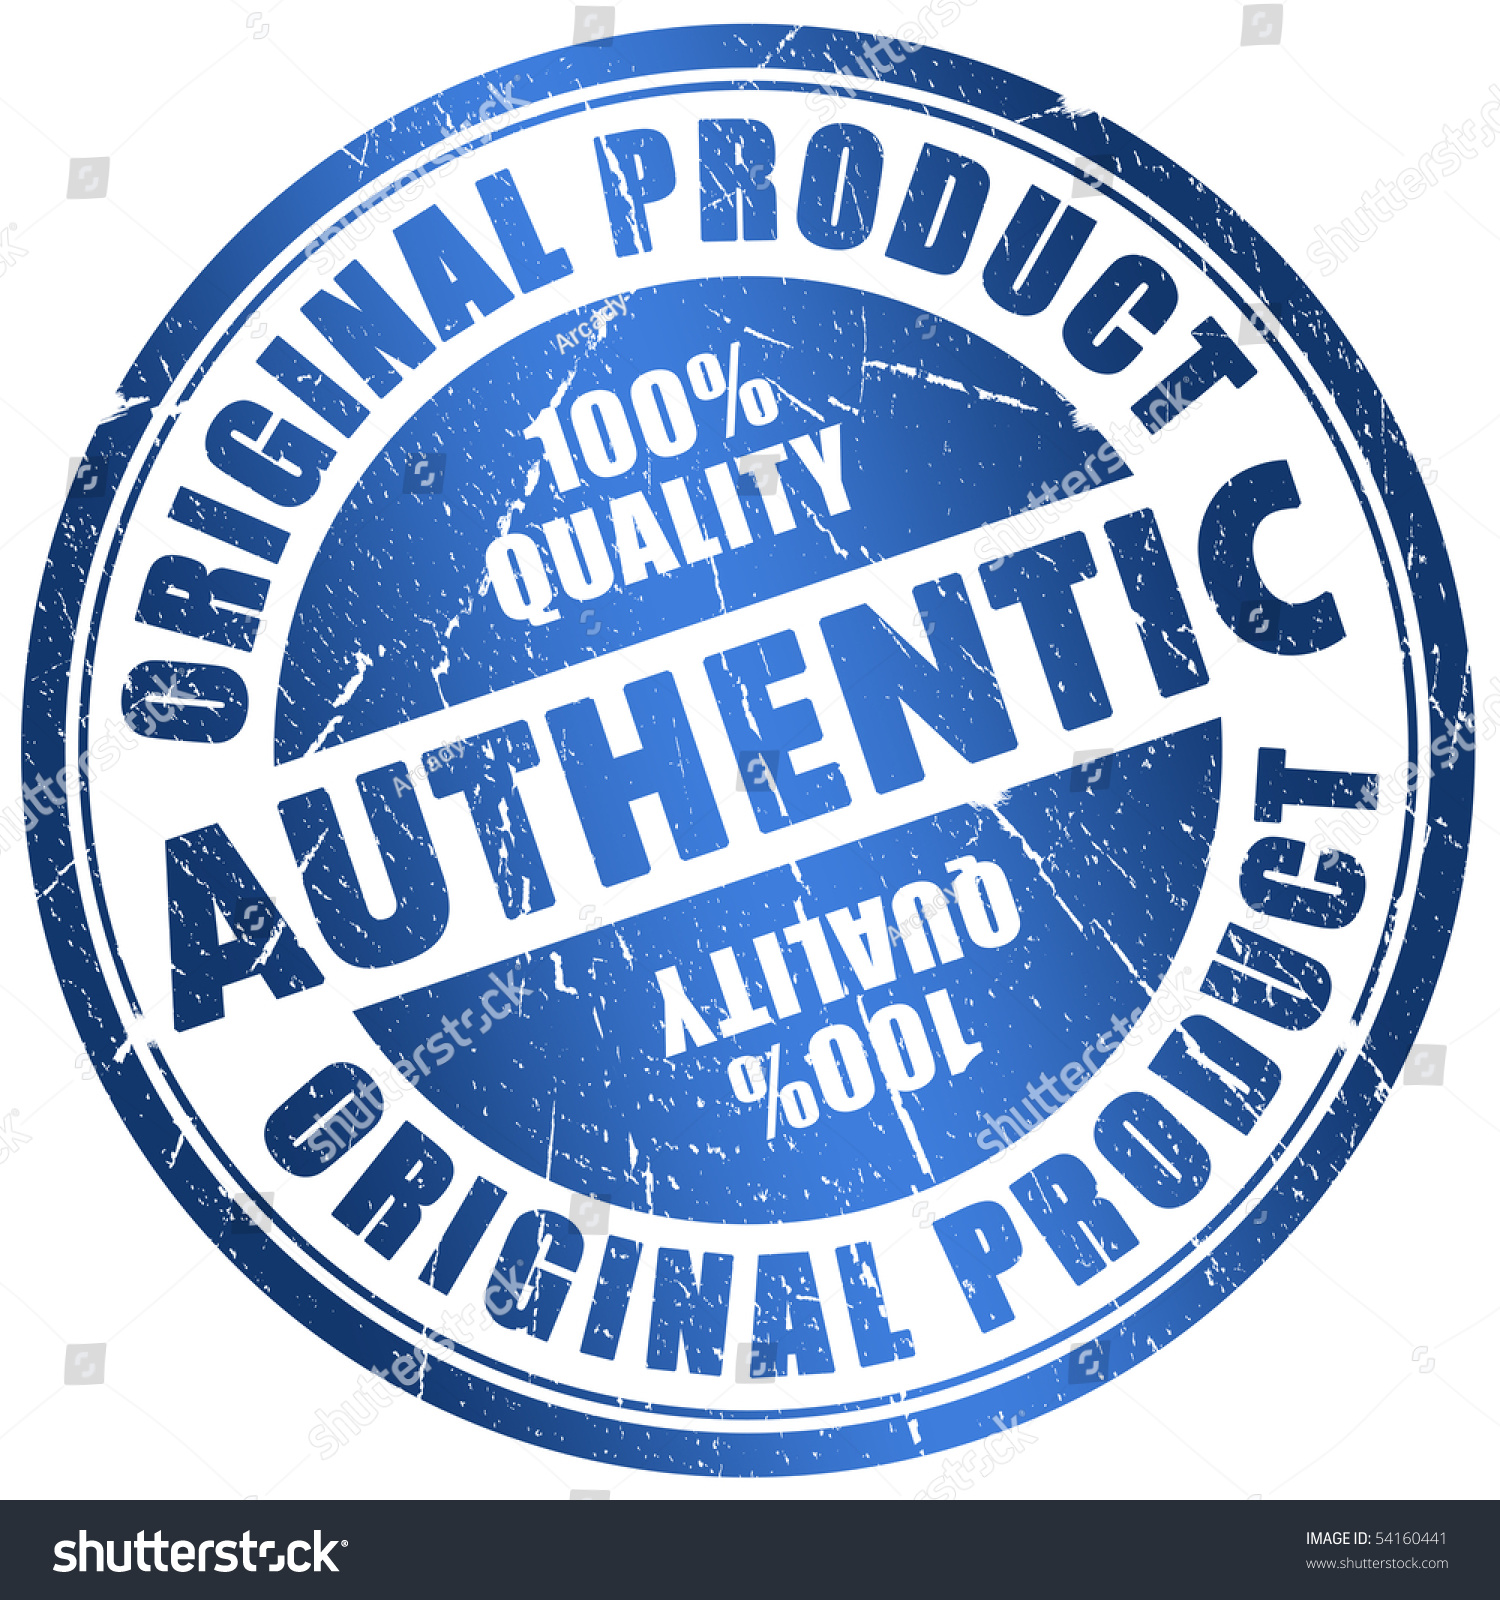 Authentic Stamp Stock Illustration 54160441 - Shutterstock